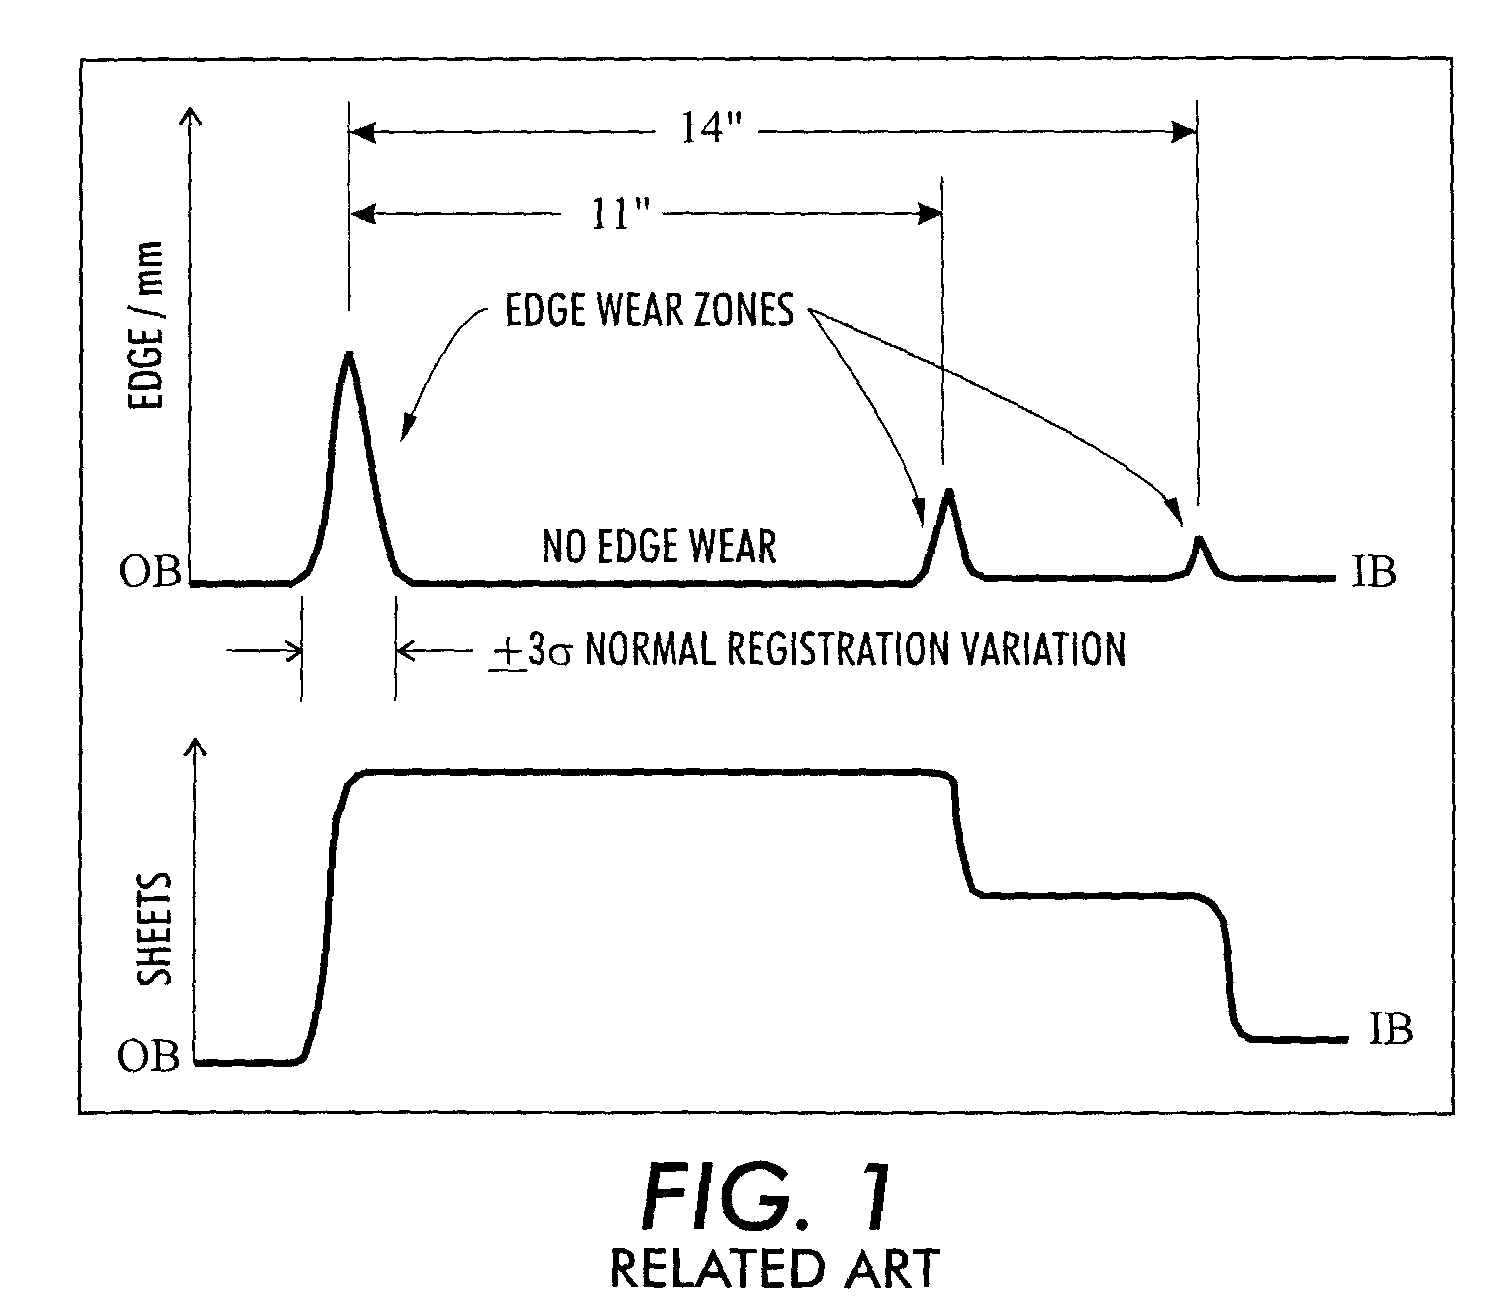 Systems and methods for continuous motion registration distribution with Anti-backlash and edge smoothing